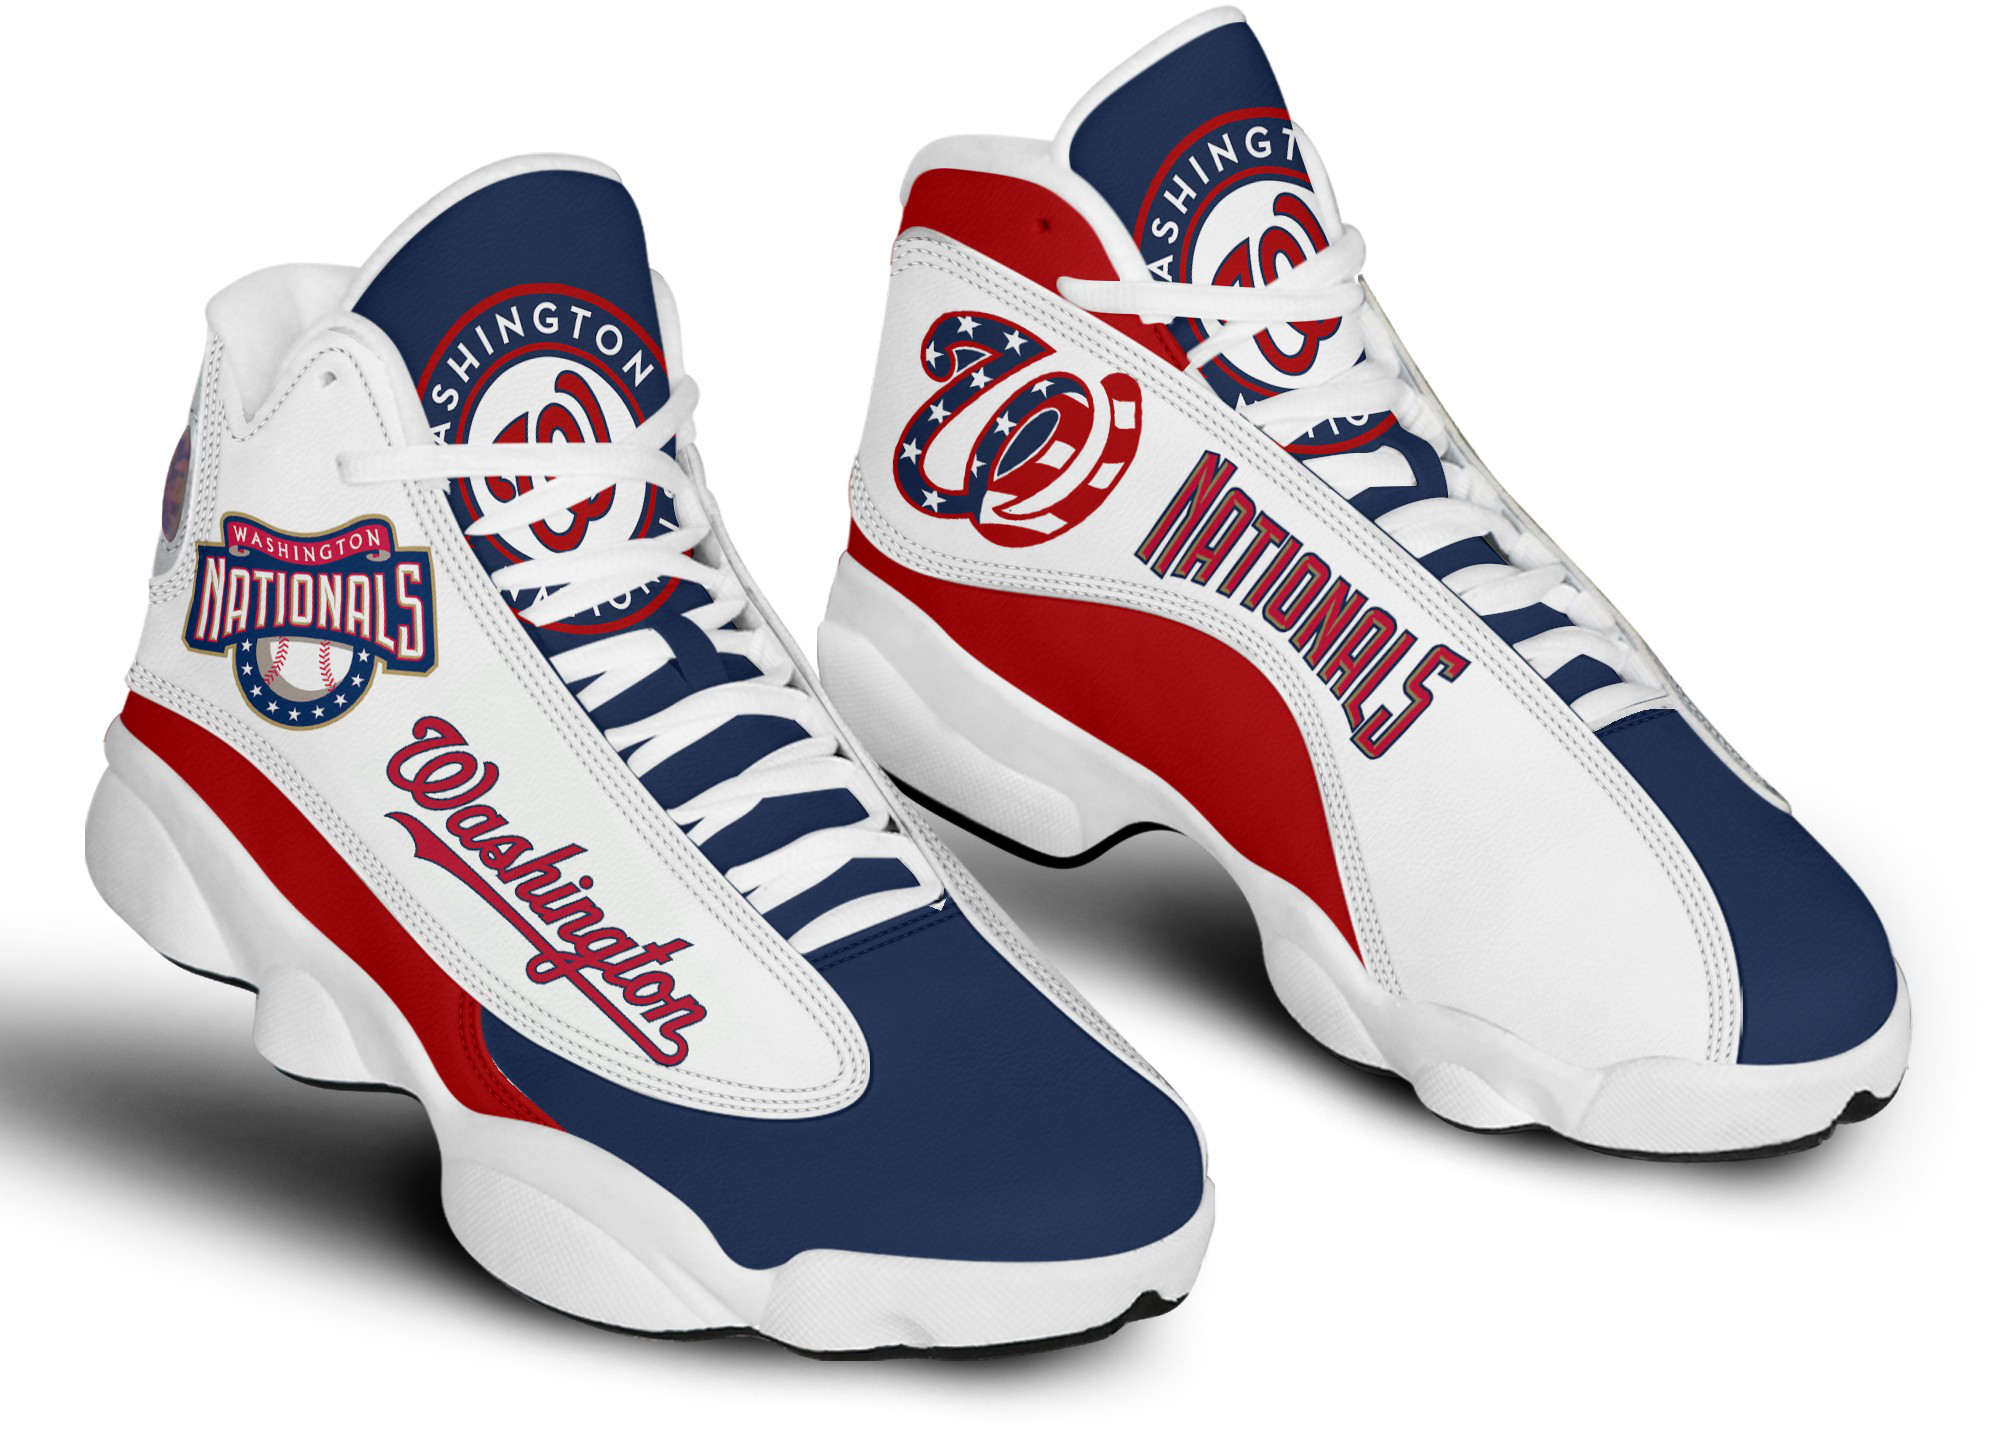 Men's Washington Nationals Limited Edition AJ13 Sneakers 001